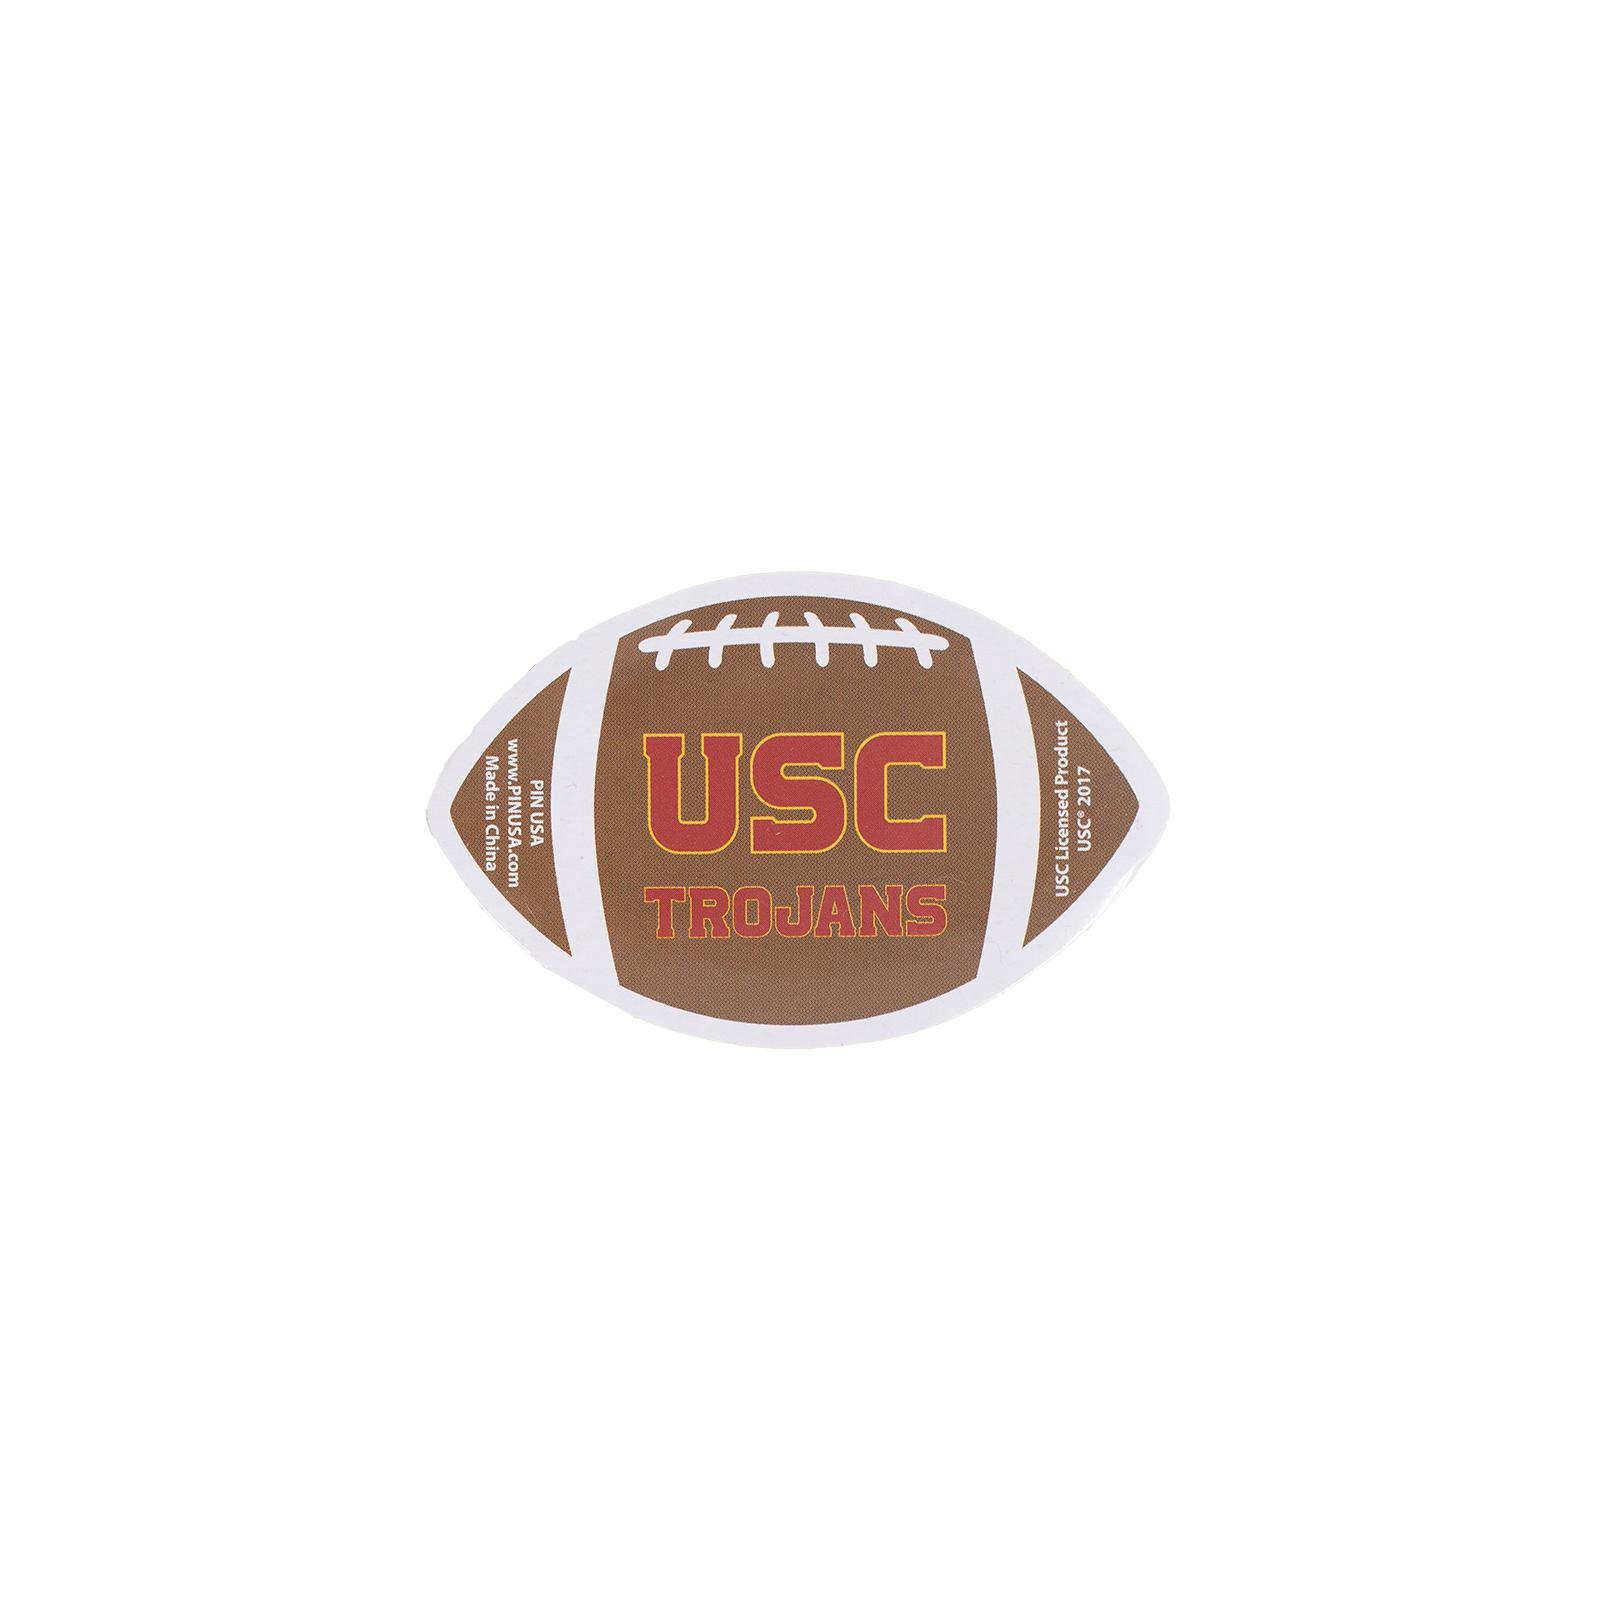 USC YELLOW COMPRESSED TOWEL W/ BROWN FOOTBALL BY PIN USA image01